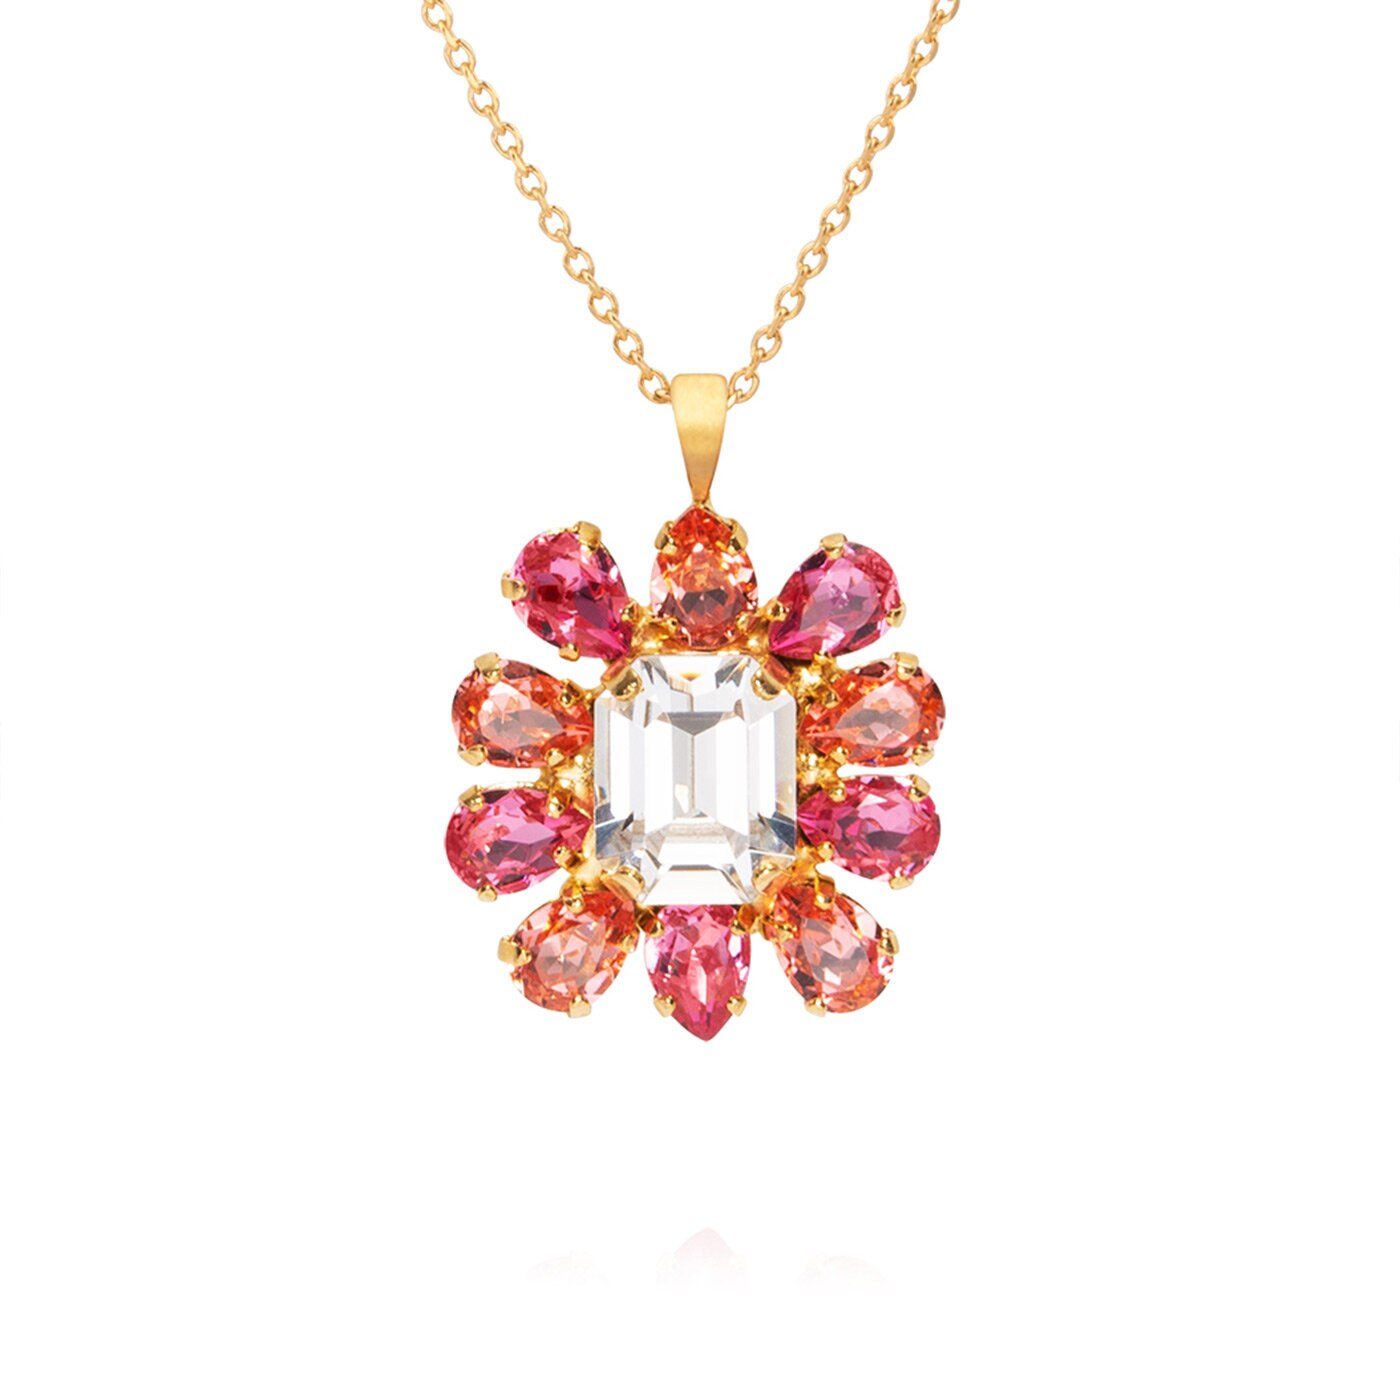 Peony Necklace Gold / Coral Combo